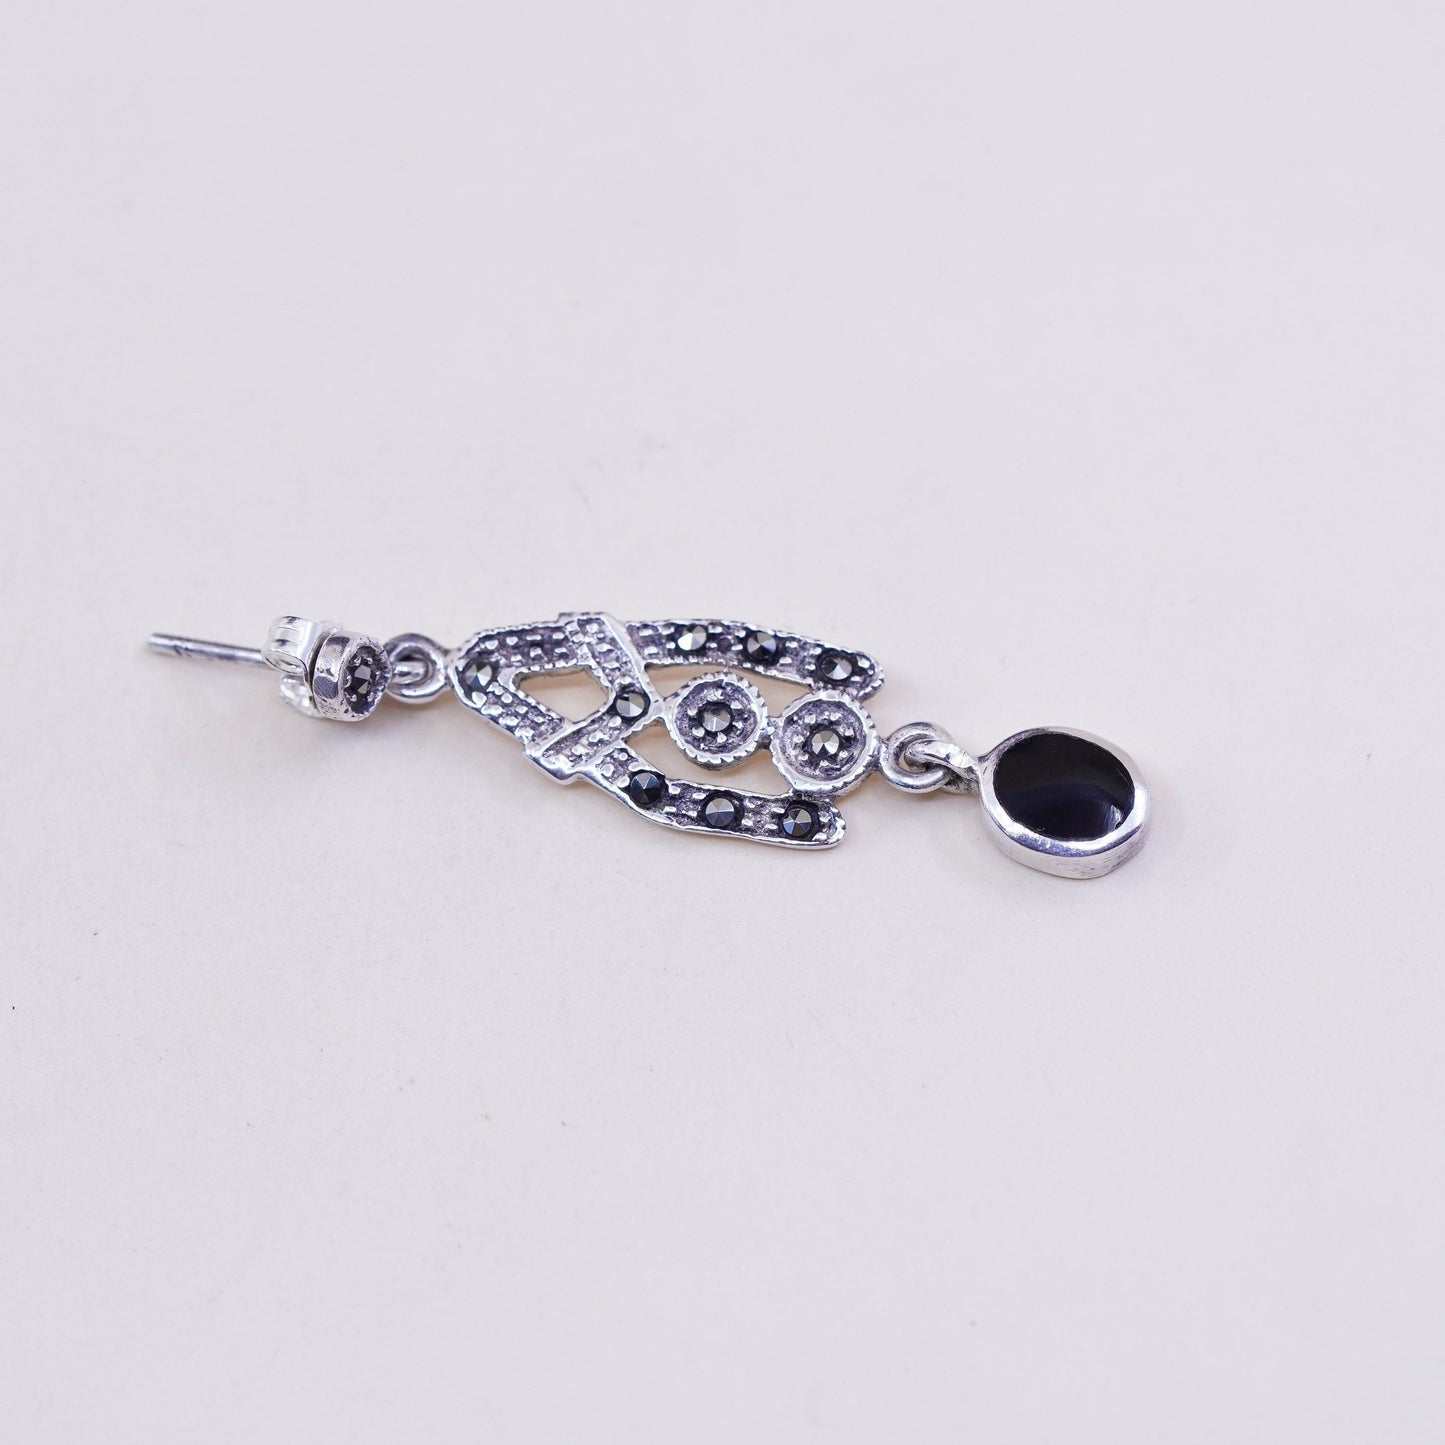 Vintage Sterling 925 silver handmade earrings with obsidian and marcasite